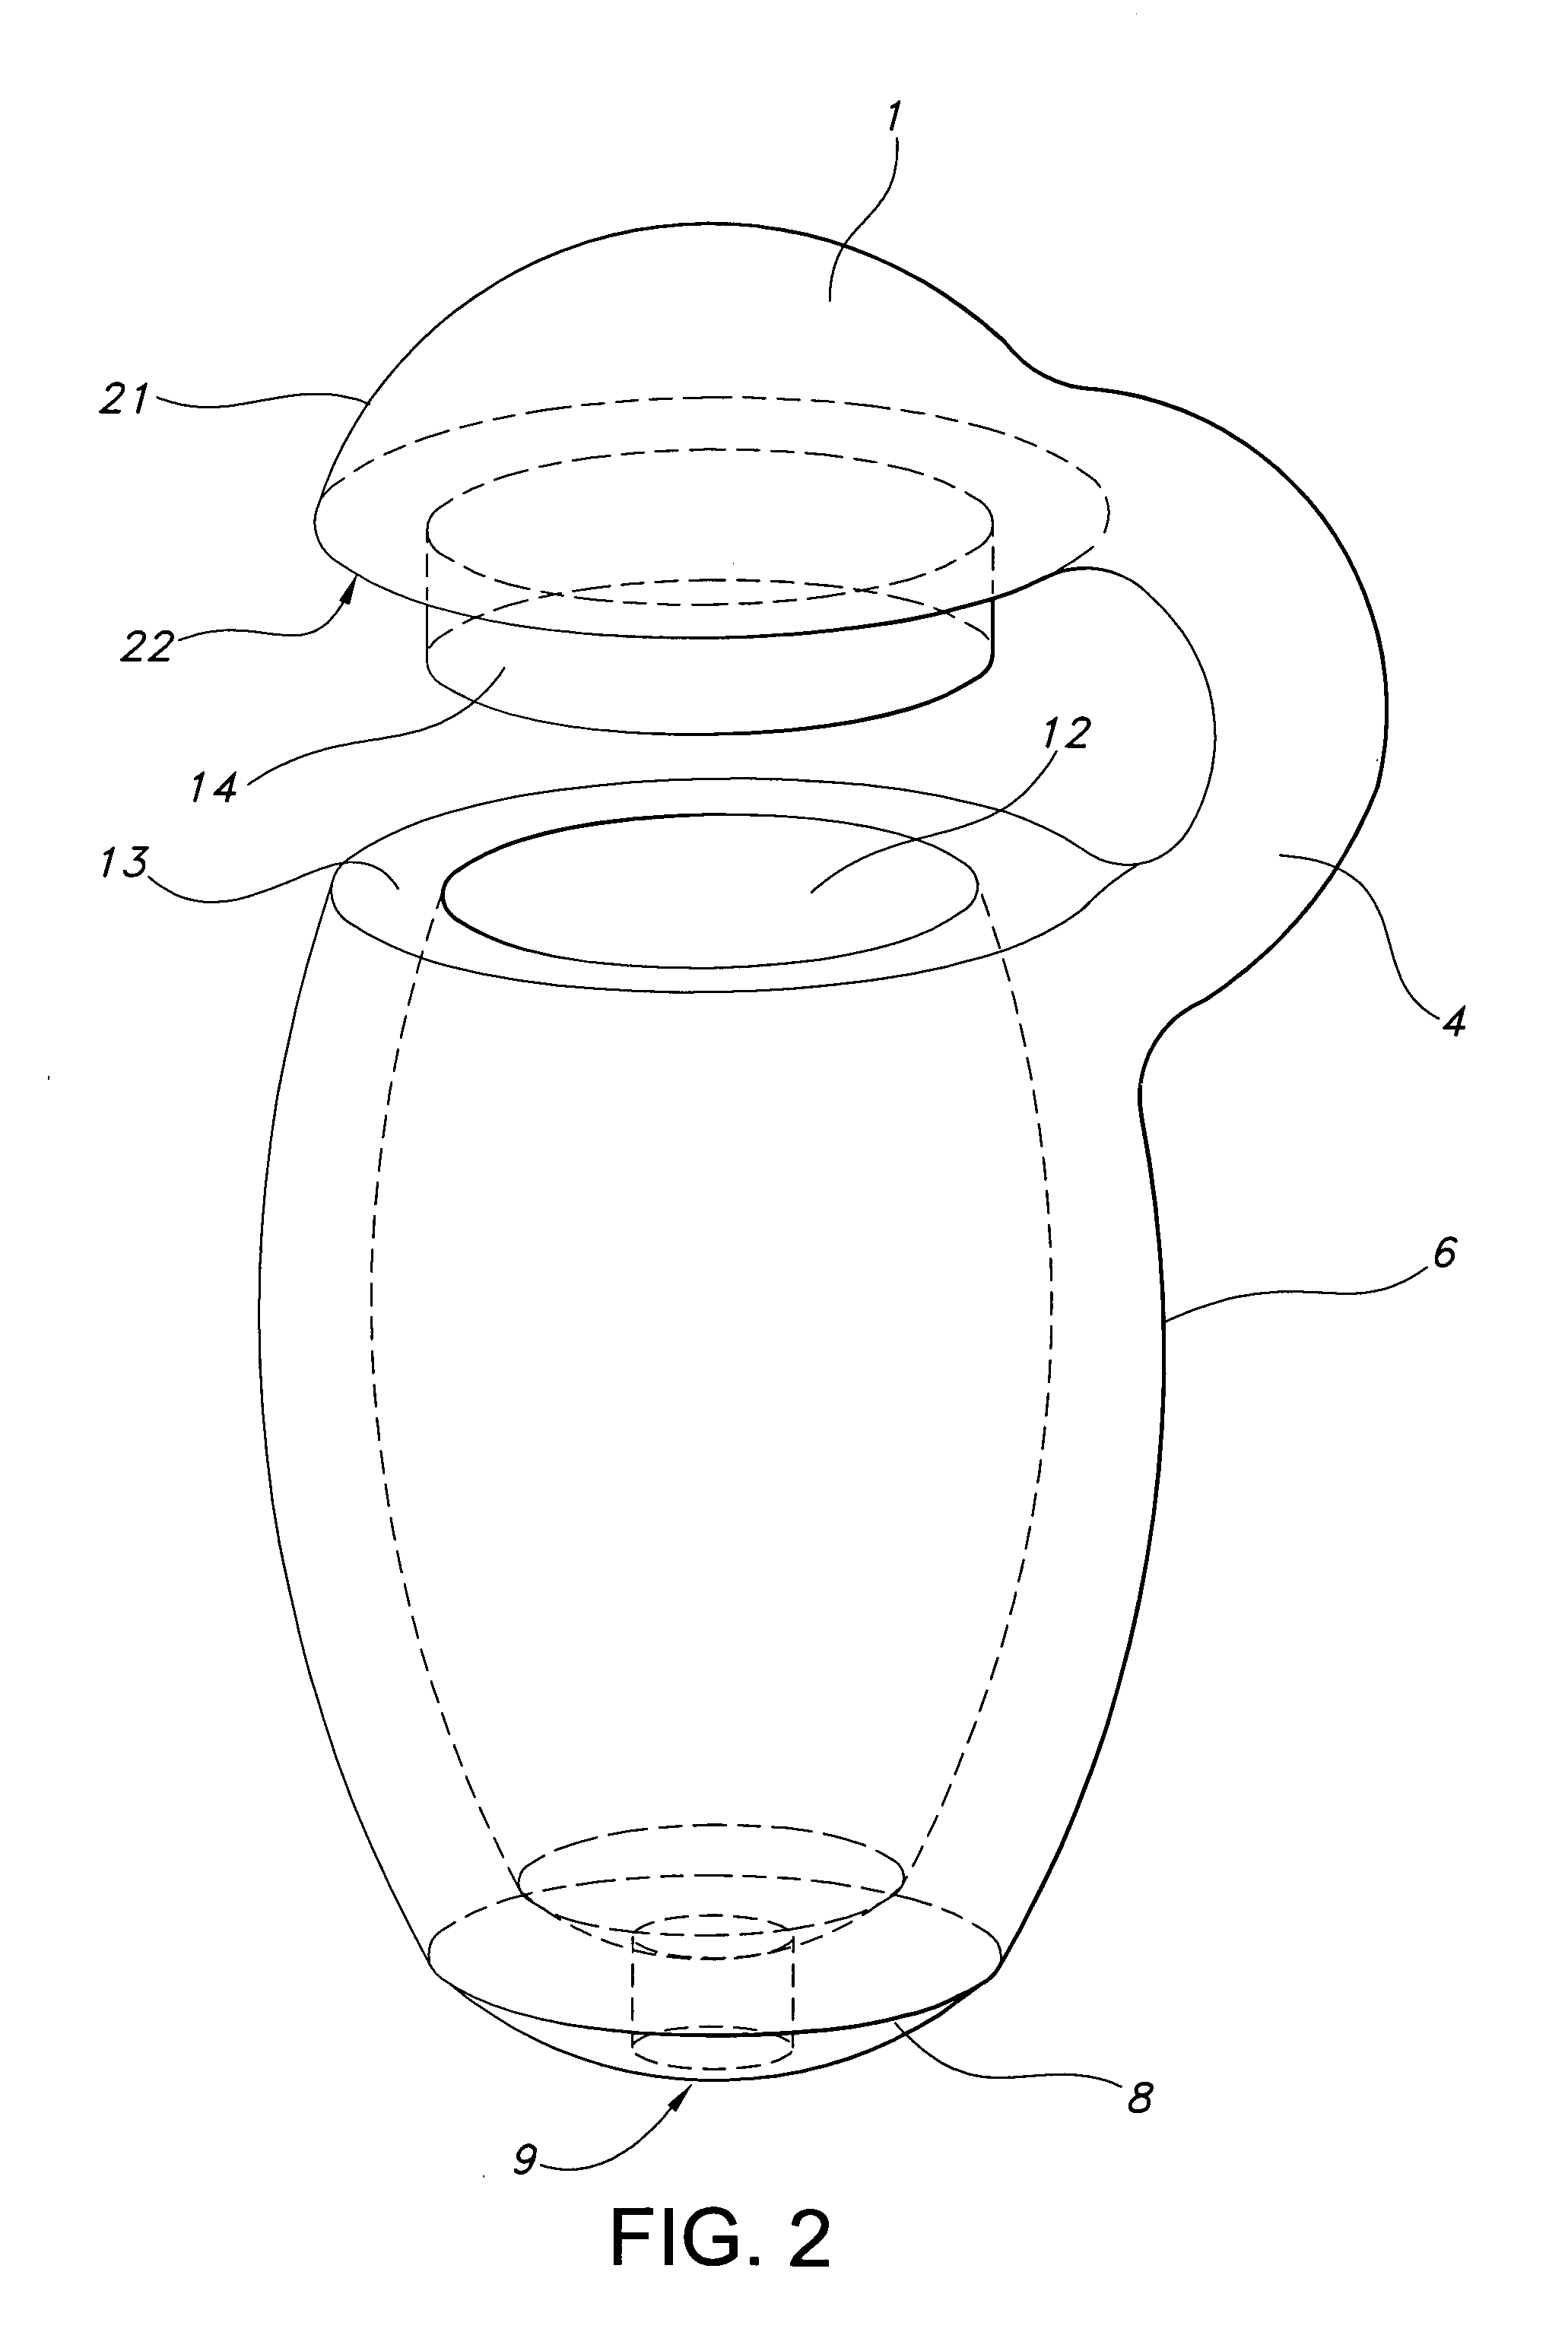 Capsule for encasing tablets for surgical insertion into the human body